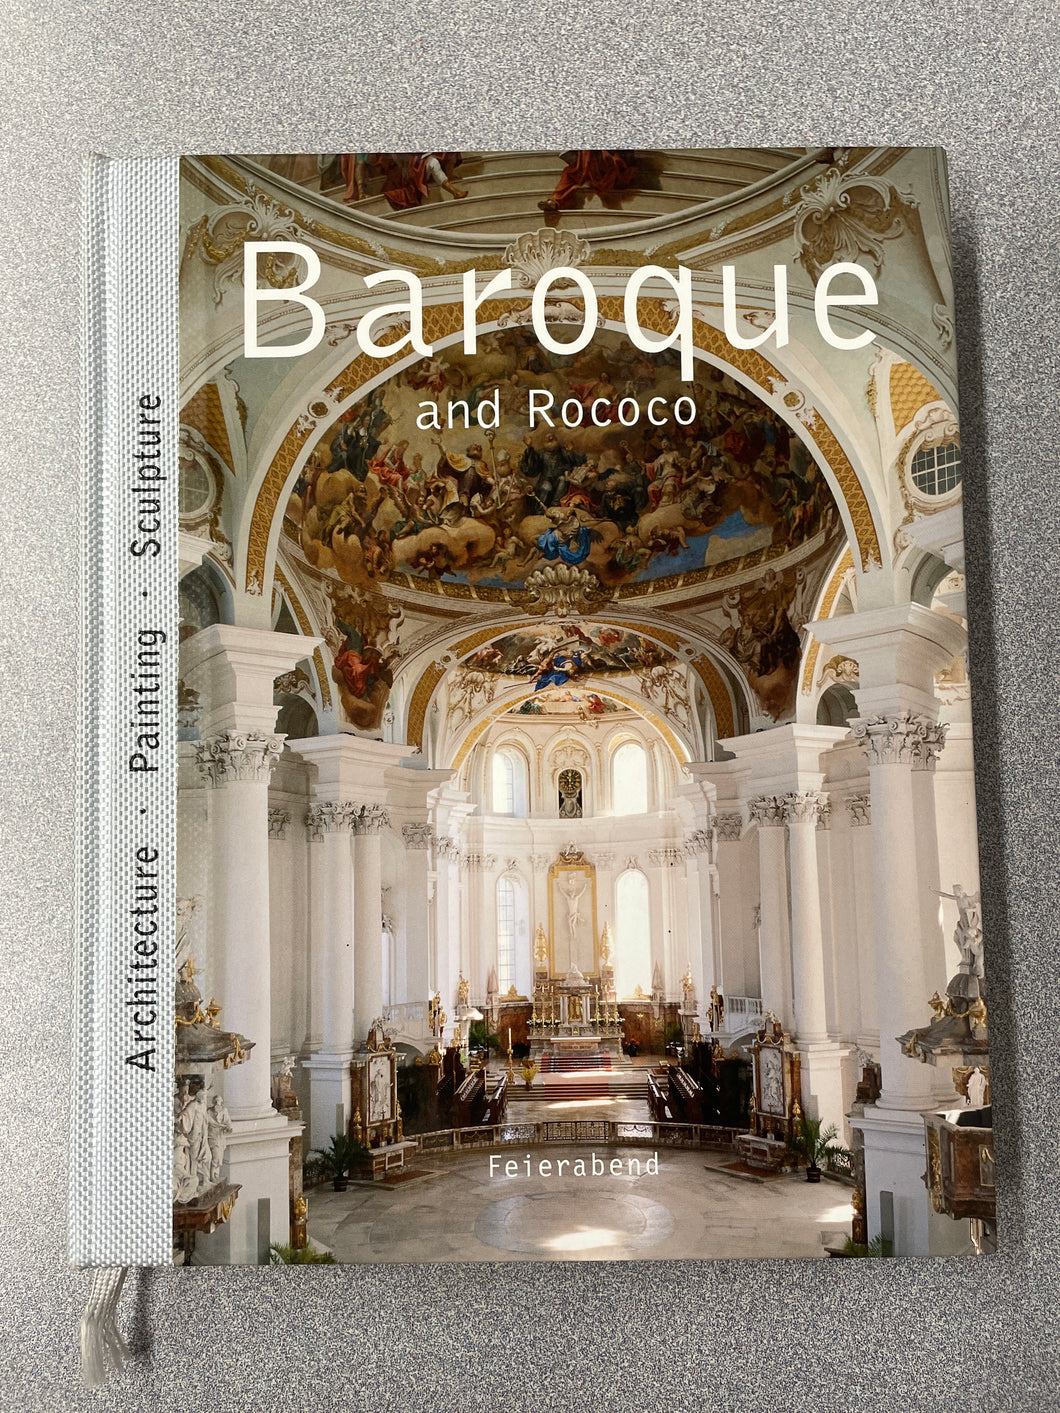 A  Baroque and Rococo: Architecture, Painting, Sculpture, Borngasser, Barbara [2003] N 1/24